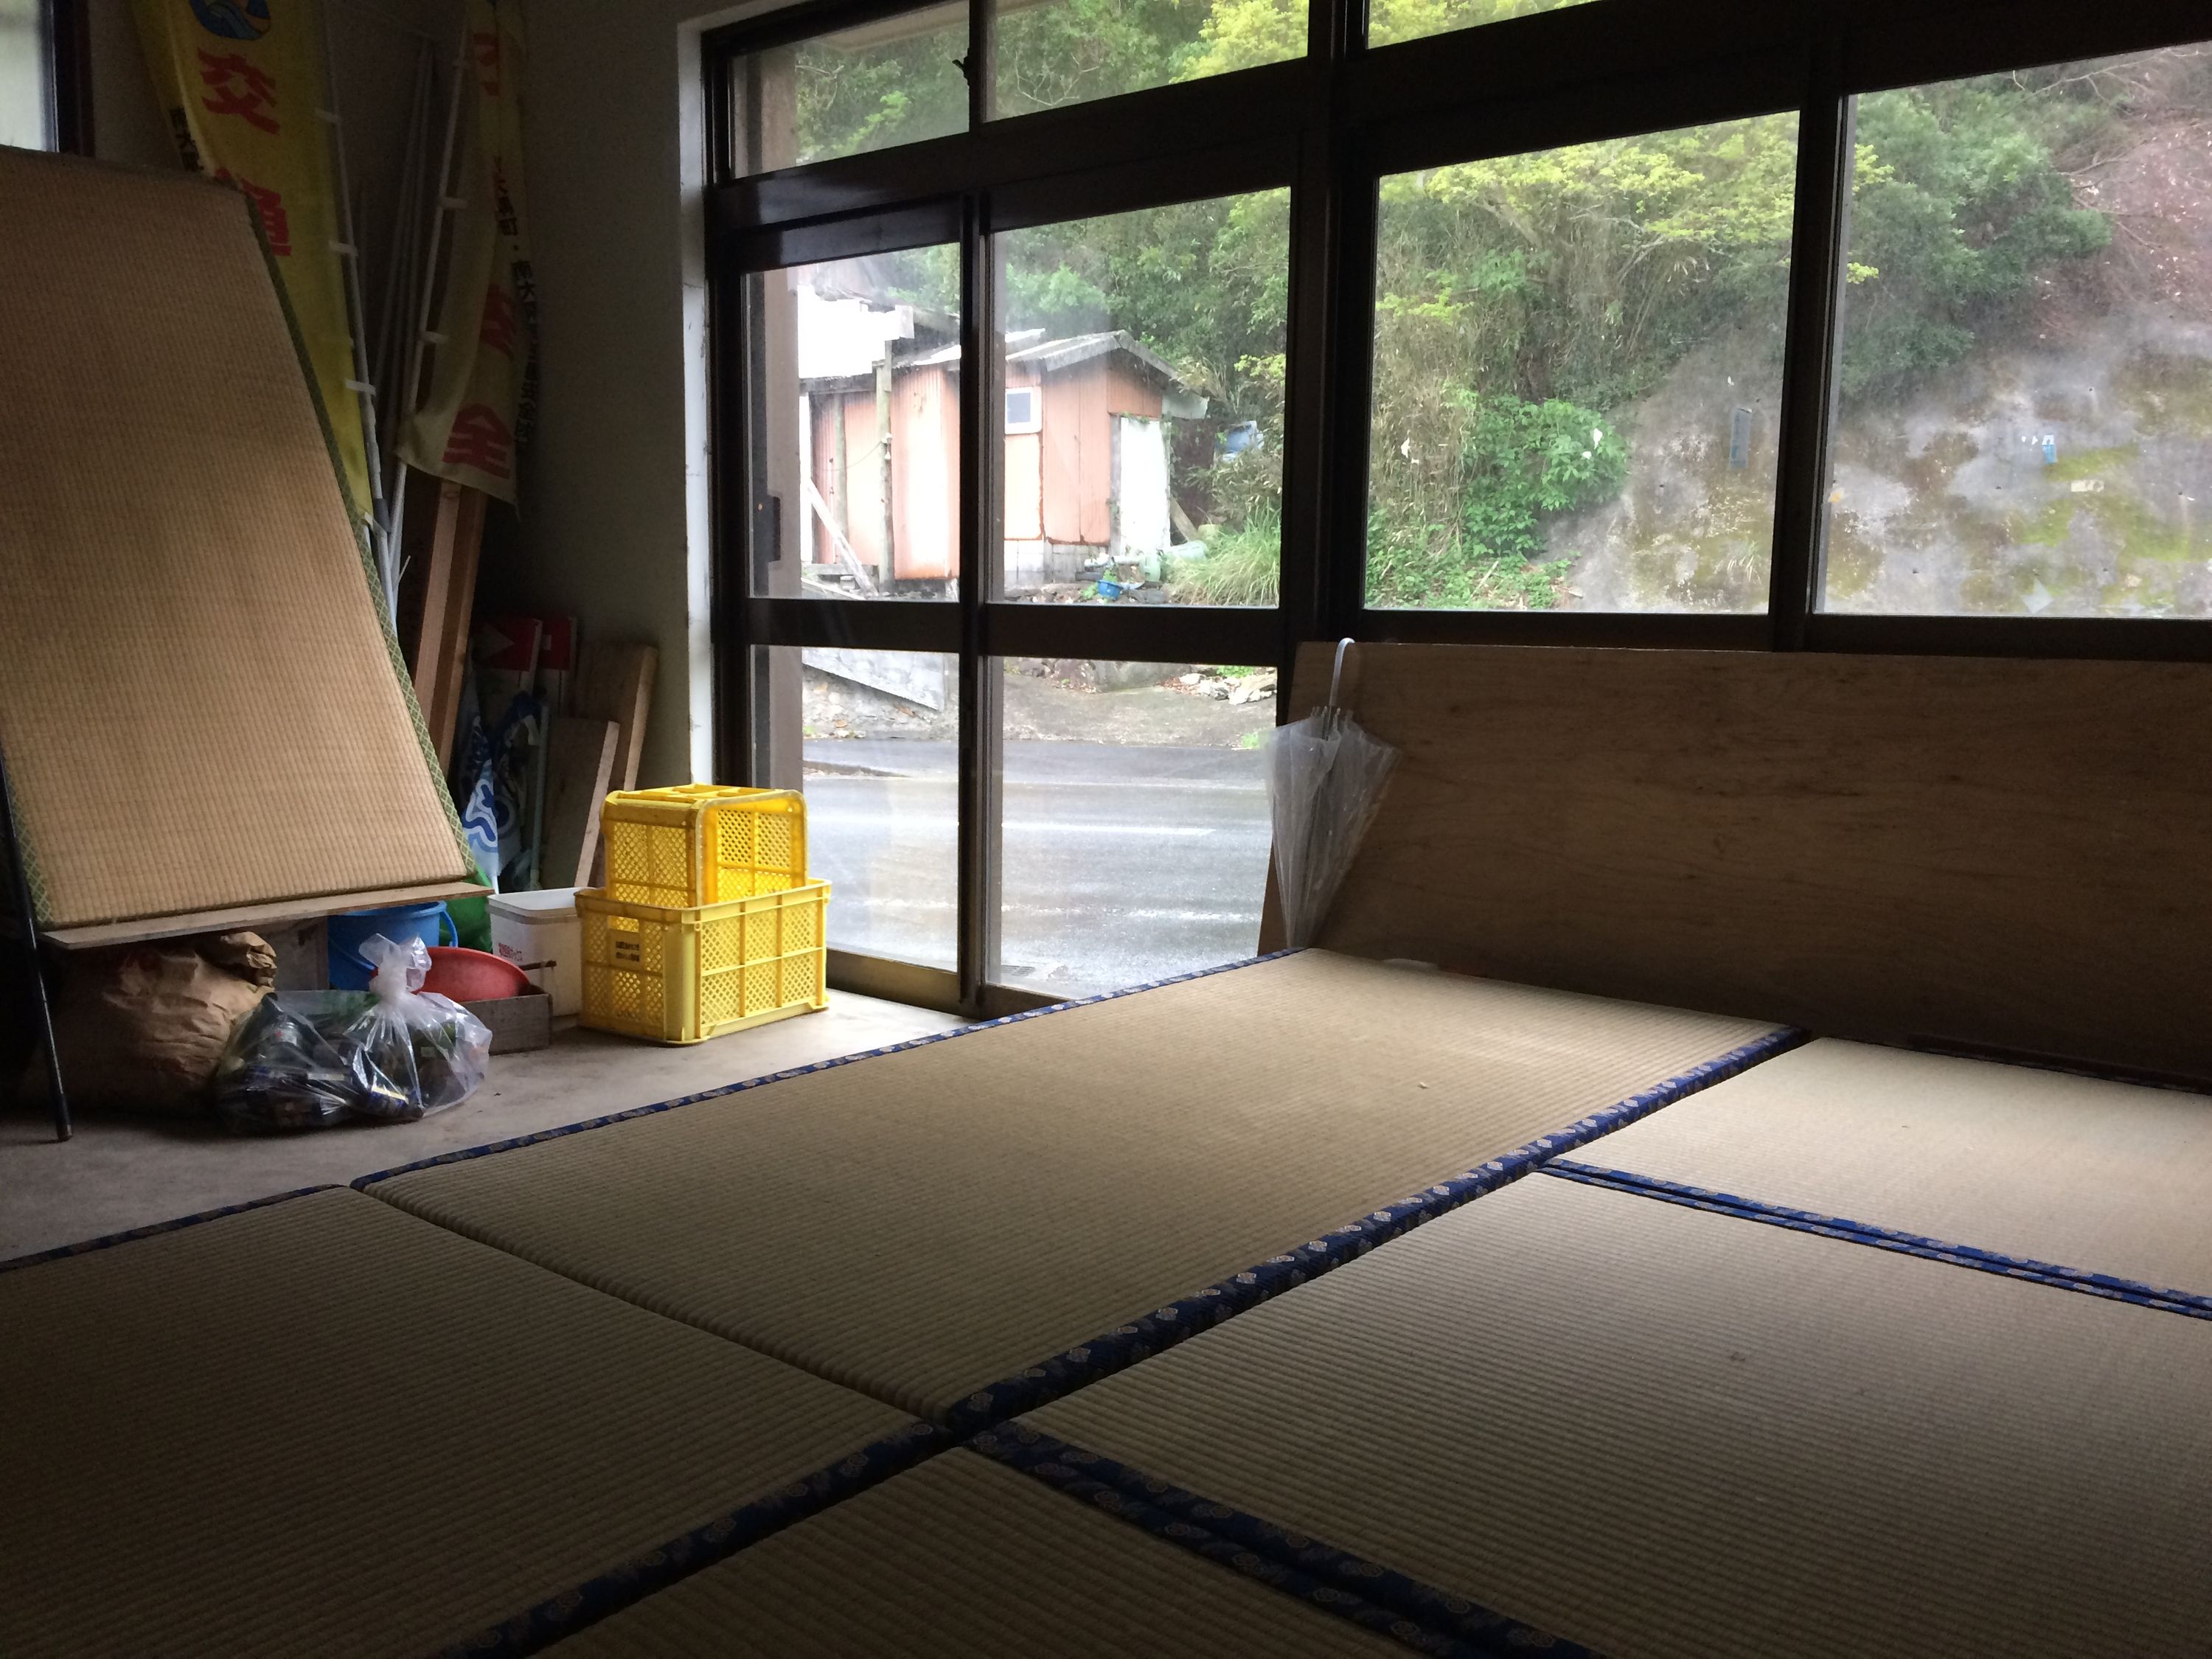 Tatami mats in a small house whose windows look out on a village street, it’s raining outside.